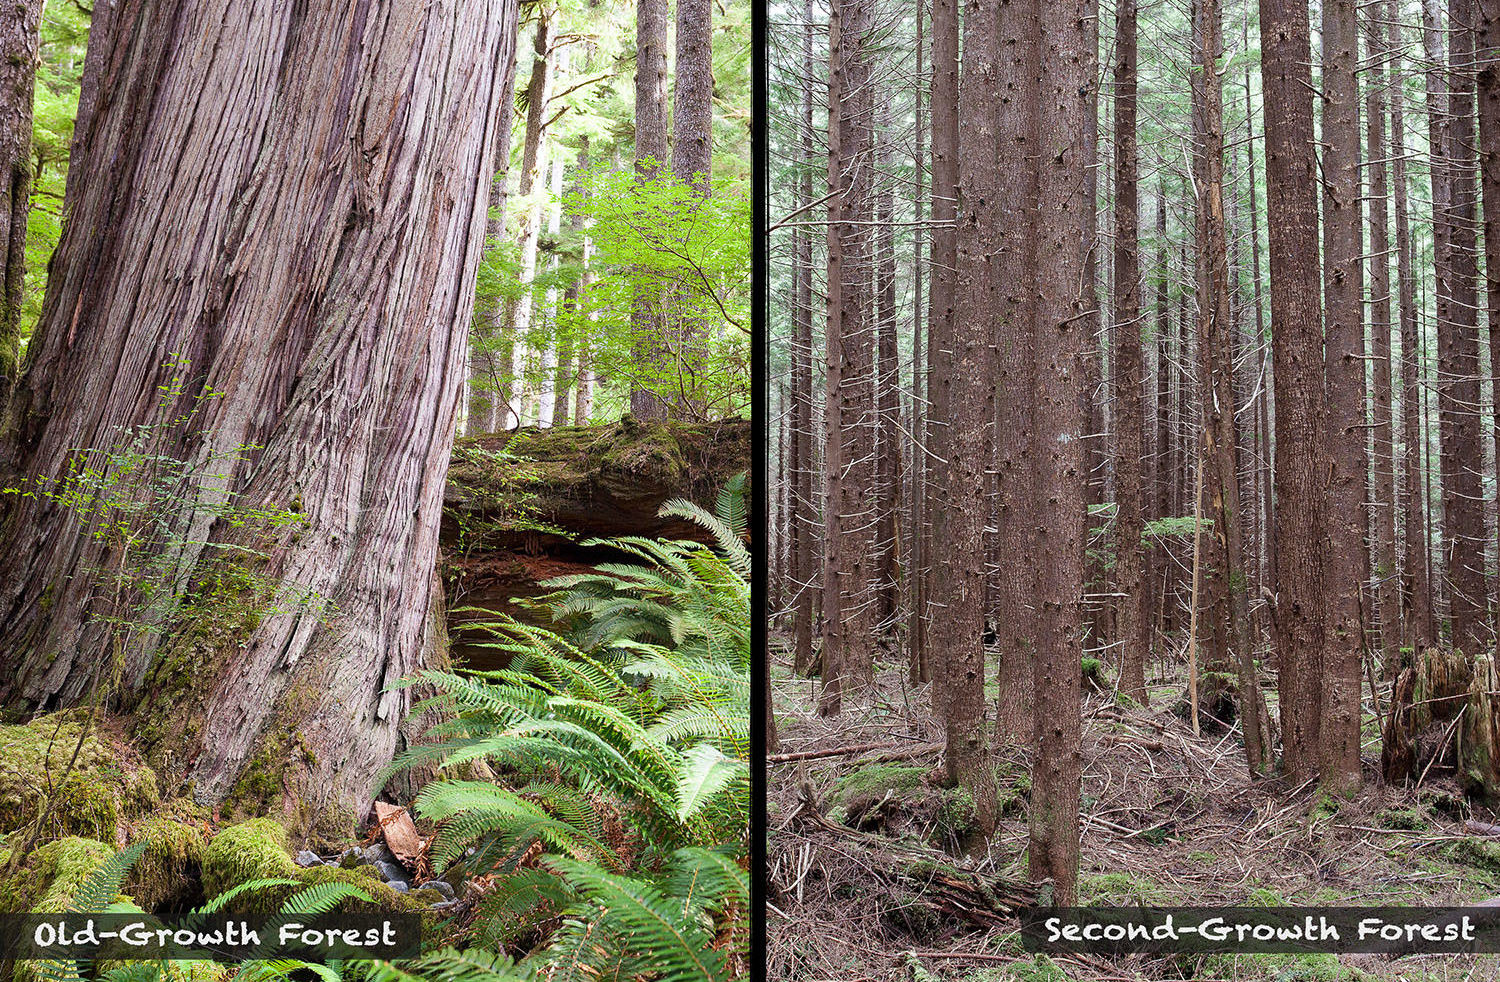 VIDEO: Old-Growth Forests vs. Second-Growth Plantations: The Differences